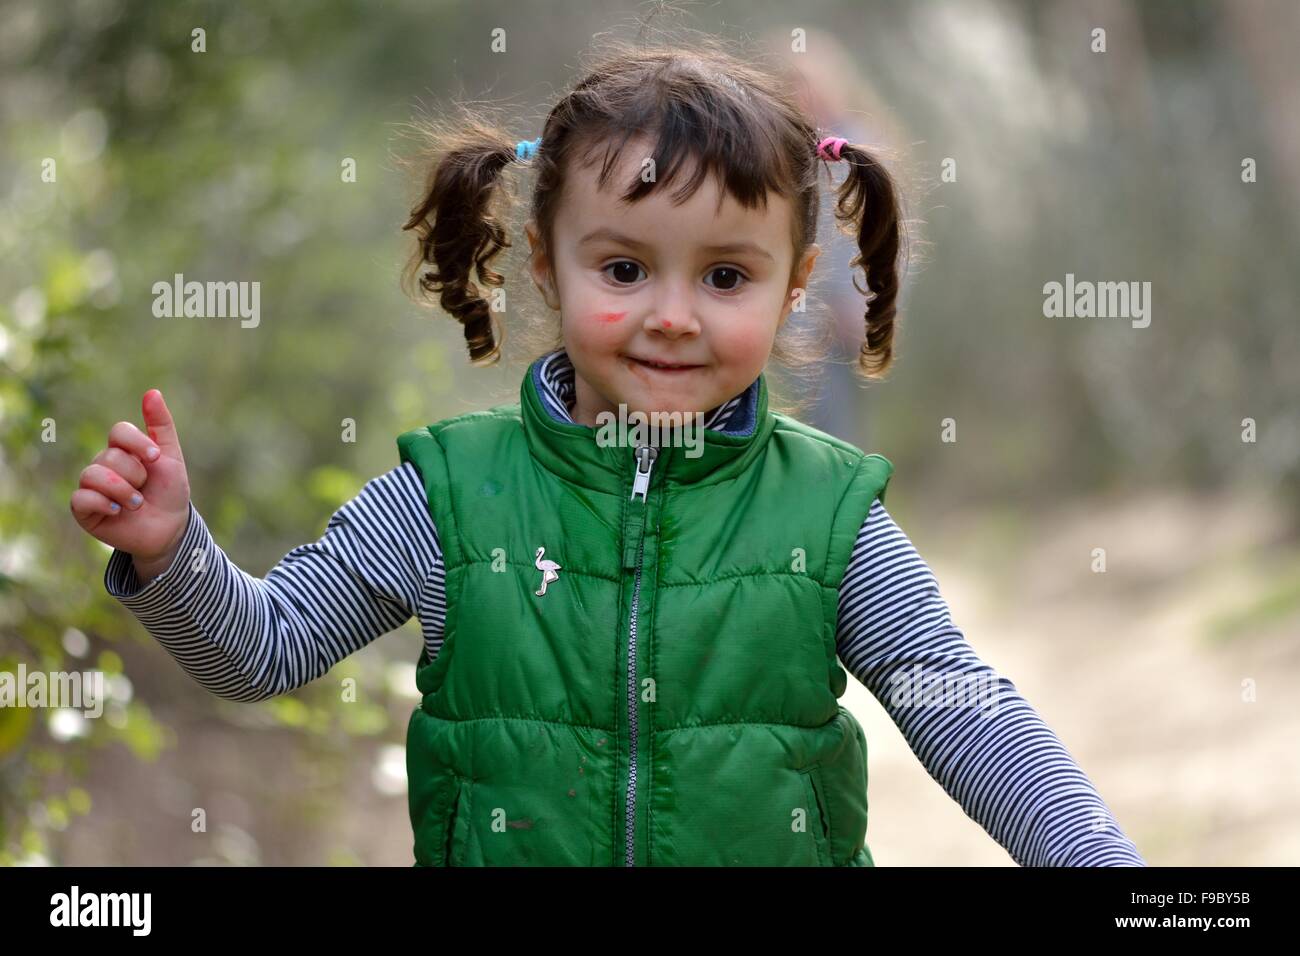 Girl with pigtails running in parkland, with pen on face Stock Photo